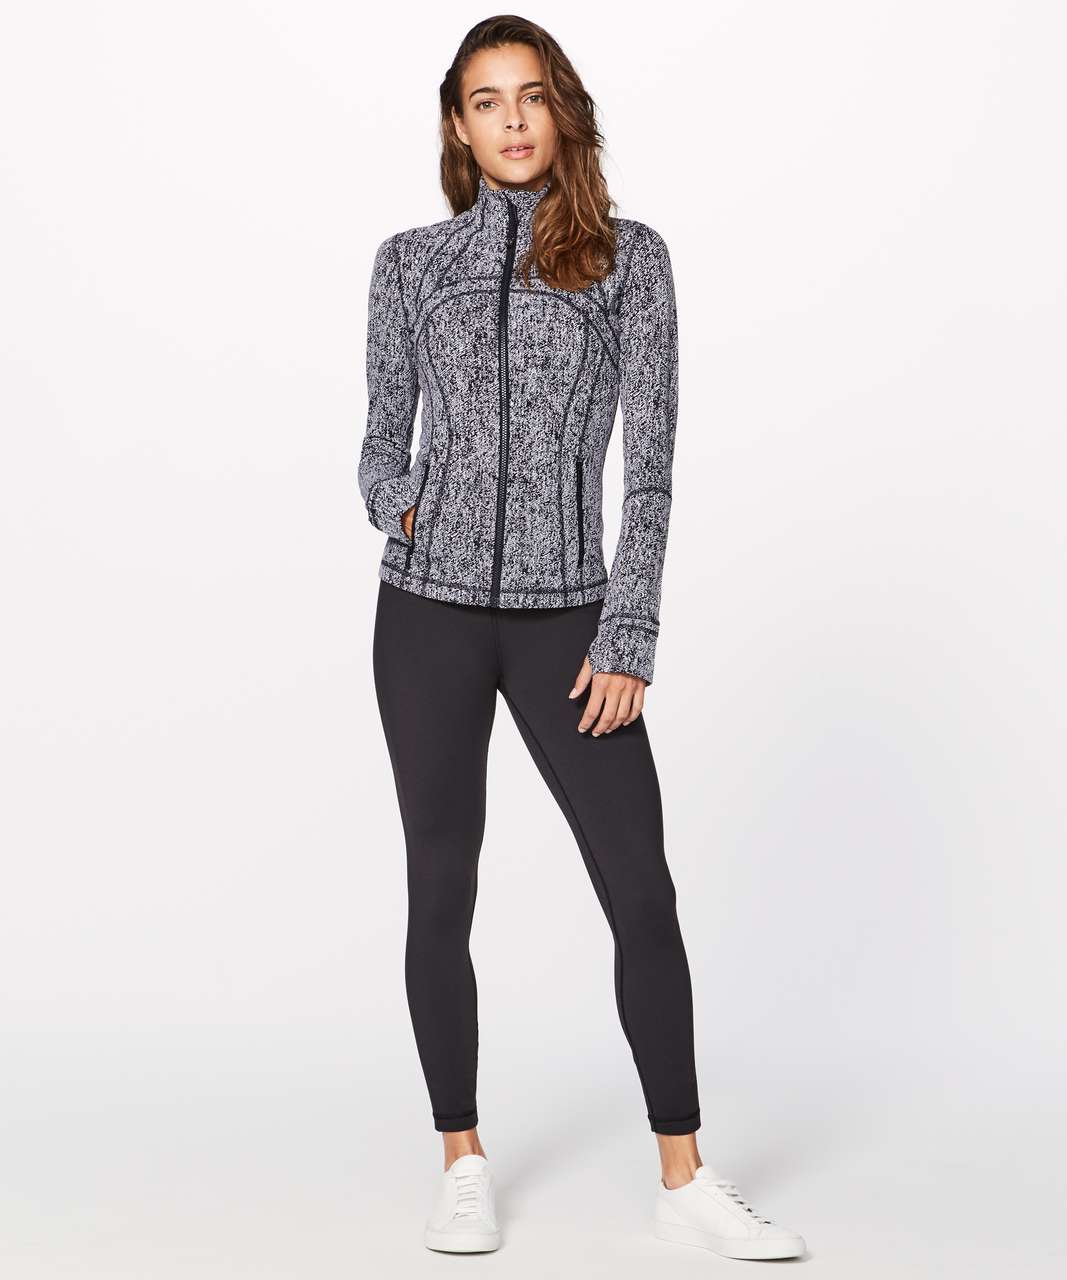 Old Navy Powersoft Leggings Reviewers